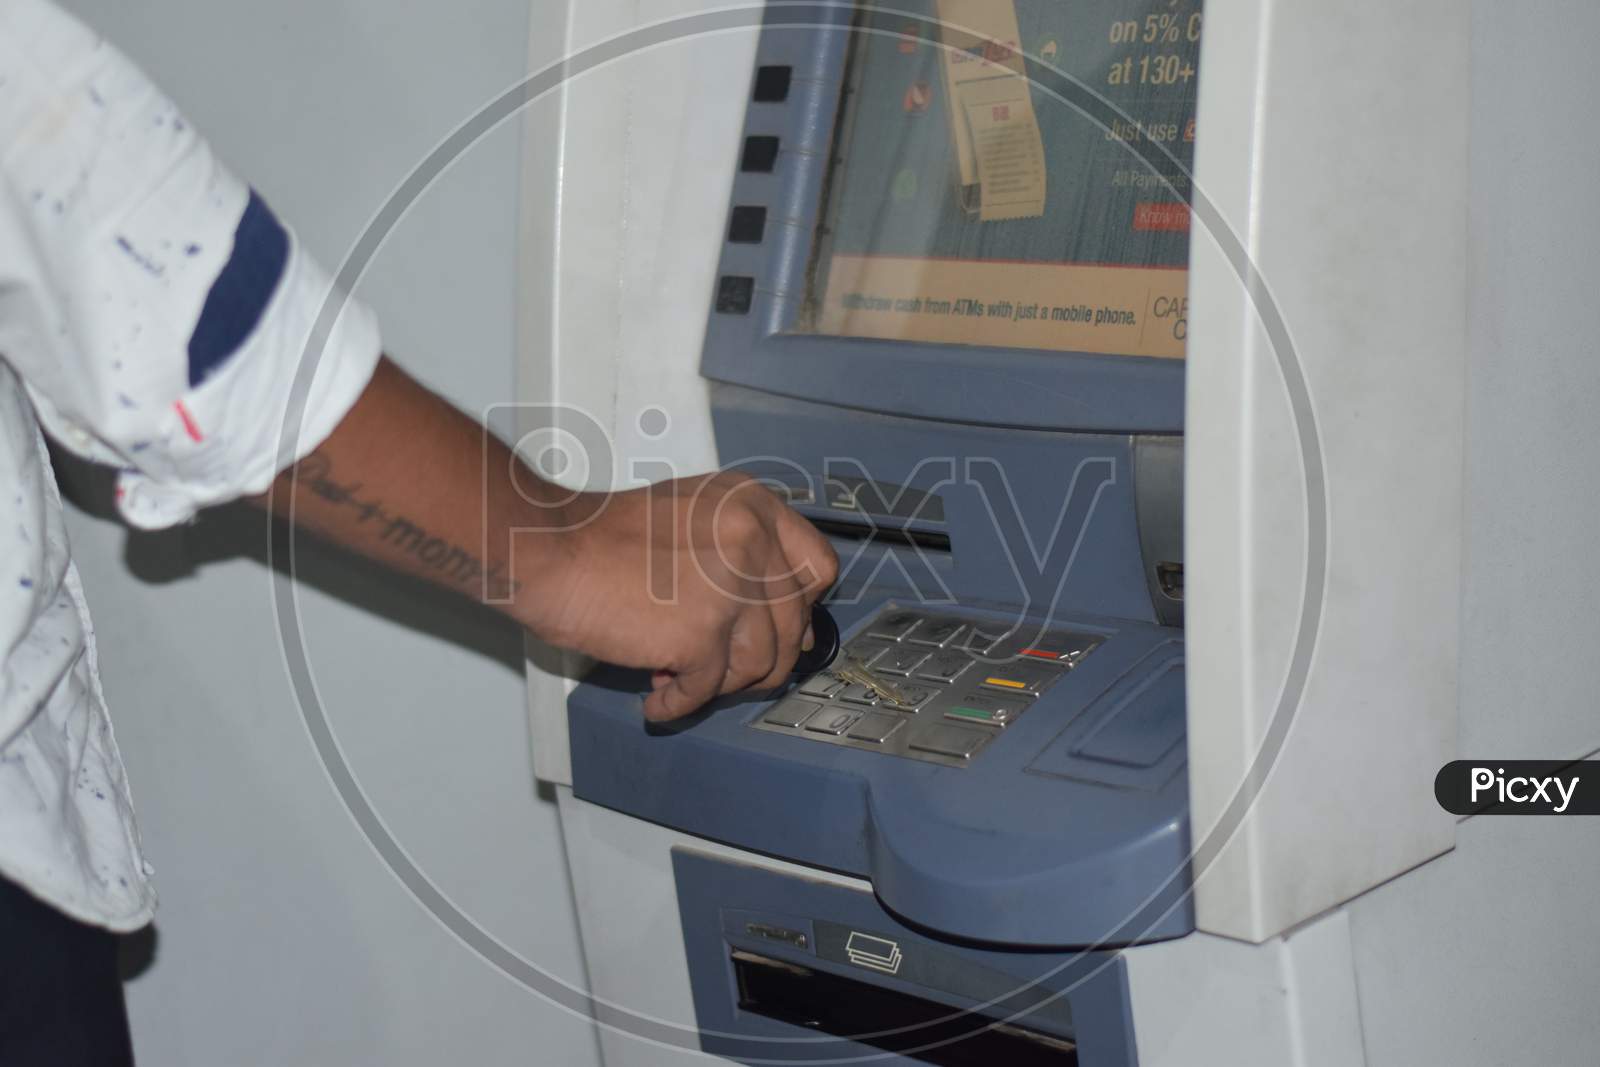 Man Using Atm Machine To Withdraw His Money. Closeup Of Hand Entering Pin Or Pass Code On Atm Machine Keypad,Security Code On Automated Teller Machine, Close Up Of Hand Entering Pin At An Atm.